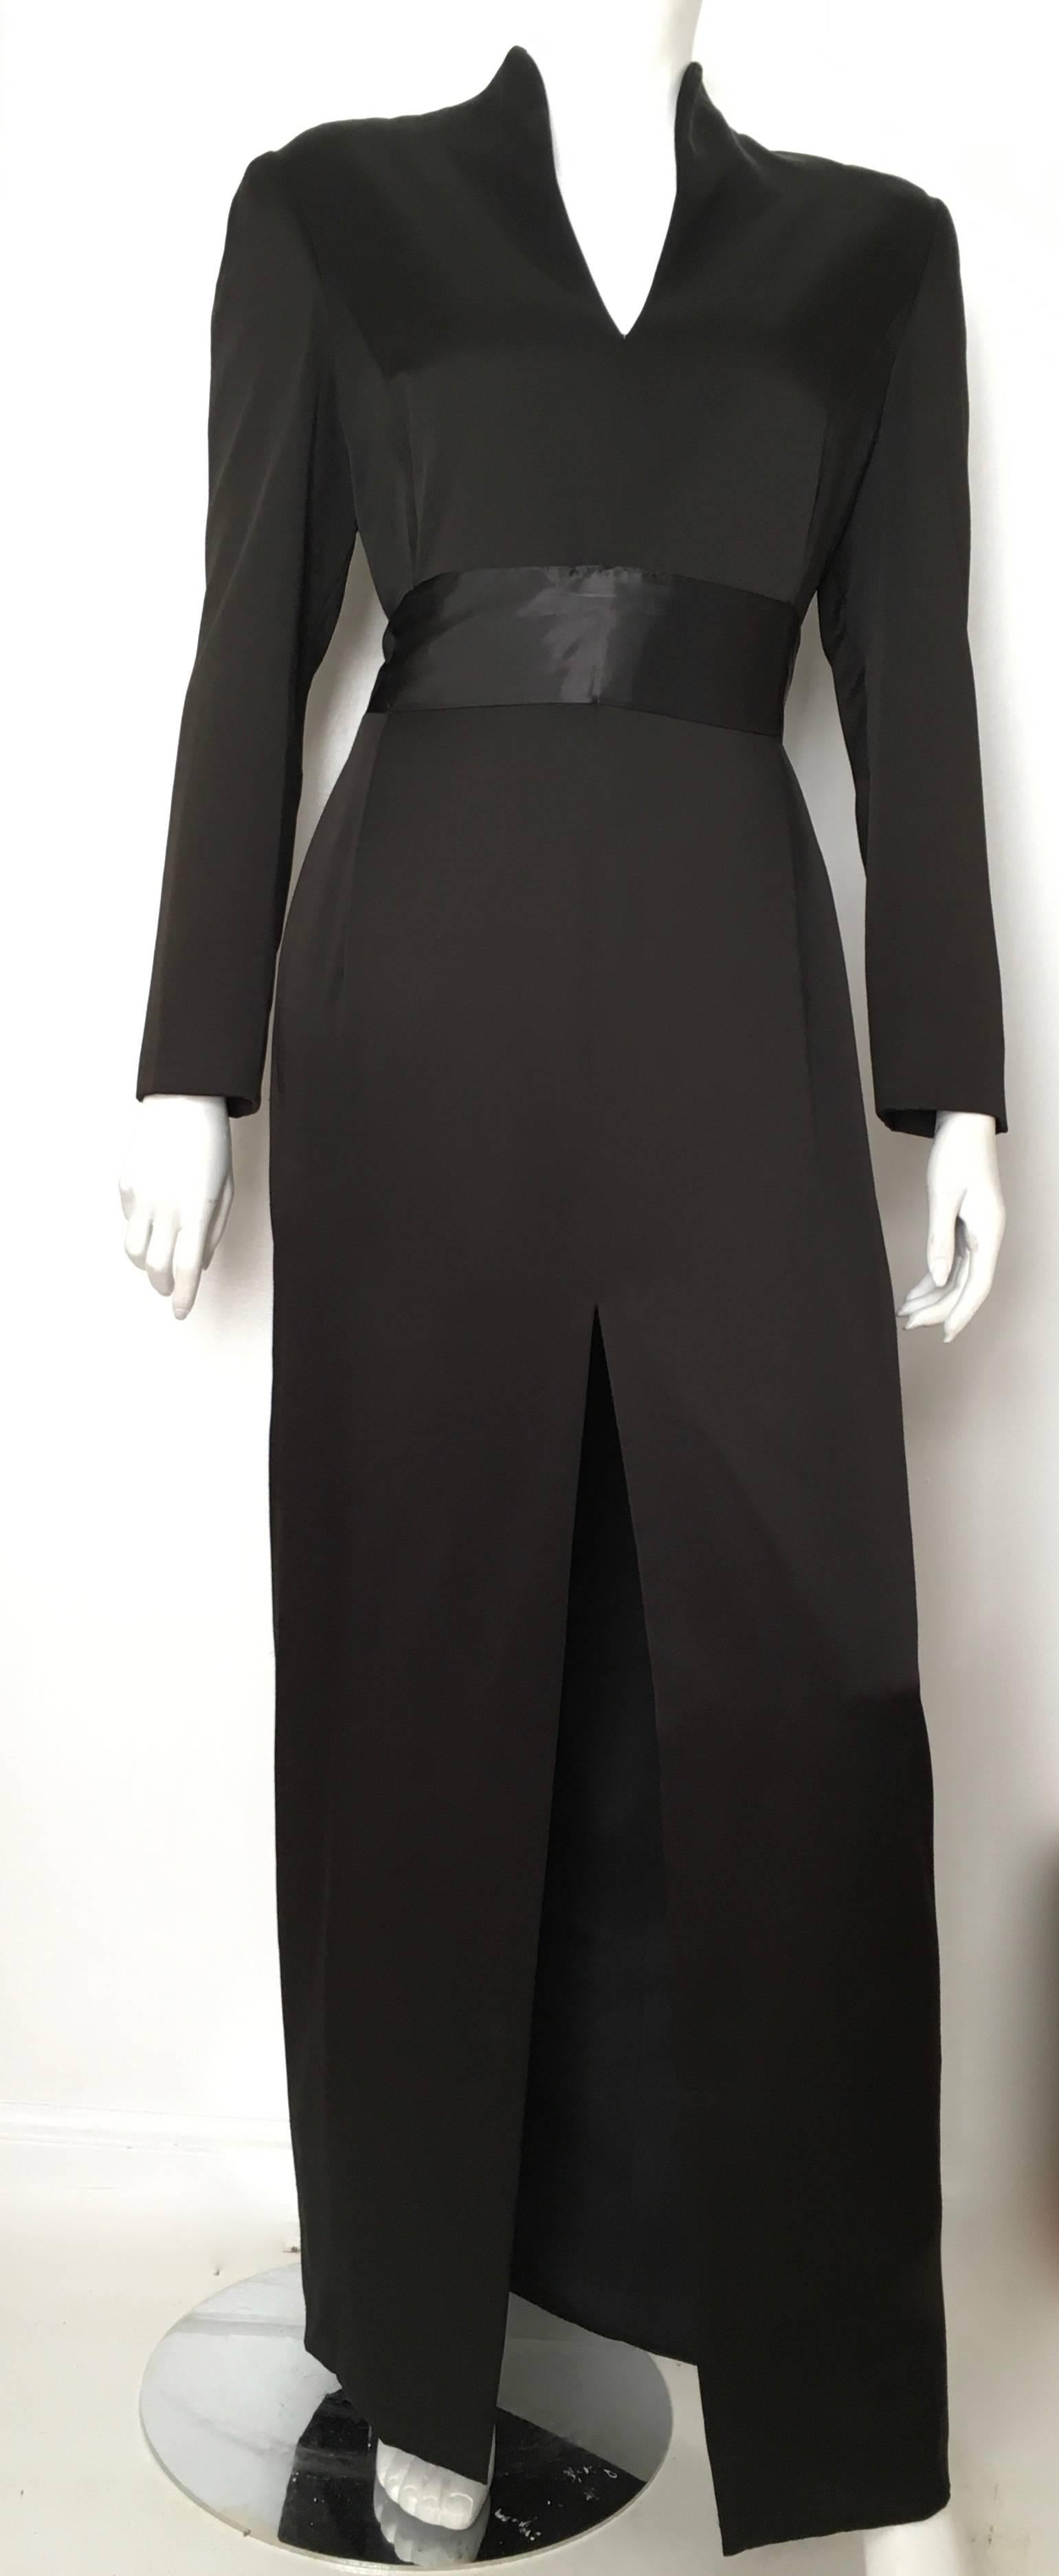 Genny black kimono style silk long gown will fit an USA size 10 / 12. Ladies please grab your tape measure and properly measure your bust, waist, hips, sleeves & length to make certain this jaw dropping gown will fit your lovely body.  This gown was